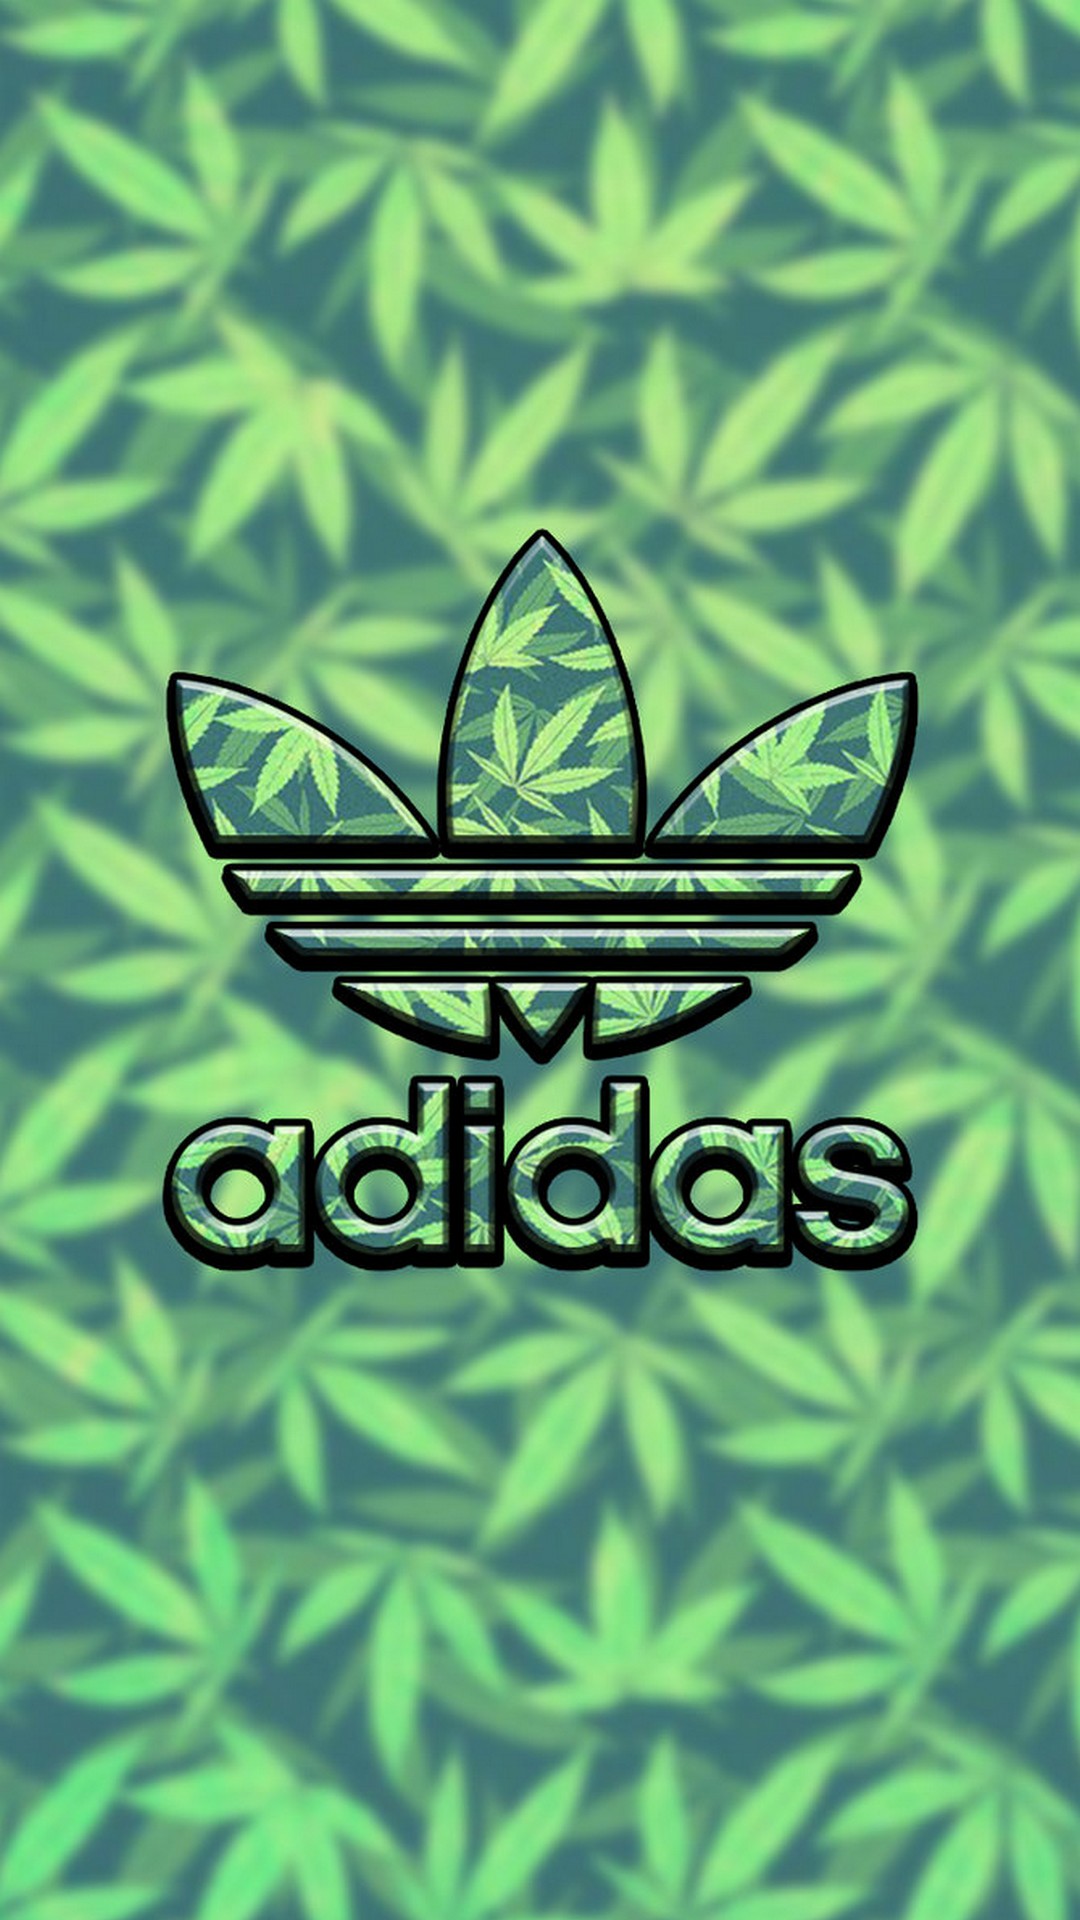 Logo Adidas Wallpaper iPhone With high-resolution 1080X1920 pixel. You can use this wallpaper for your iPhone 5, 6, 7, 8, X, XS, XR backgrounds, Mobile Screensaver, or iPad Lock Screen